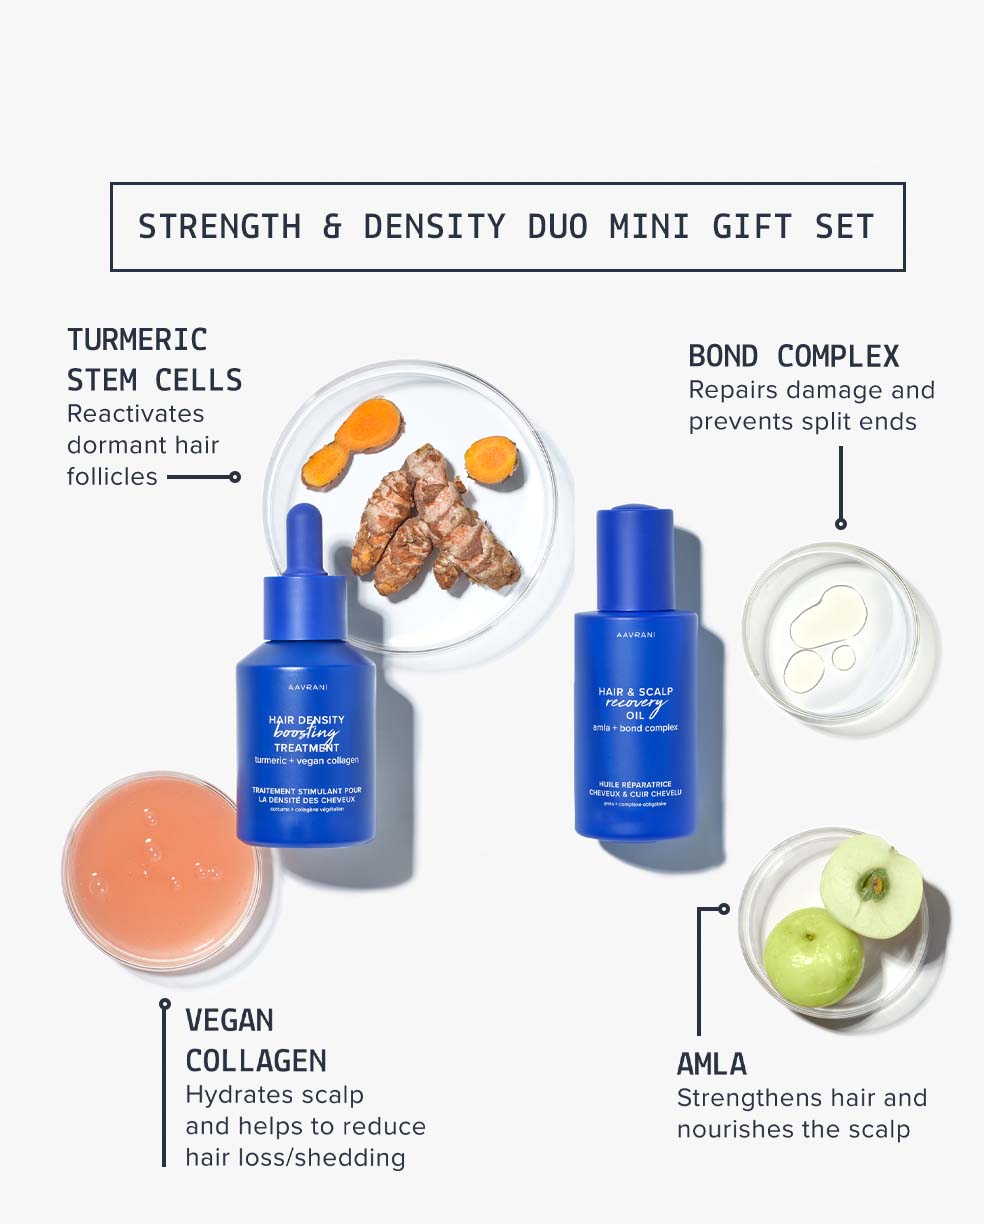 Strength and Density Duo Mini Gift Set Ingredients